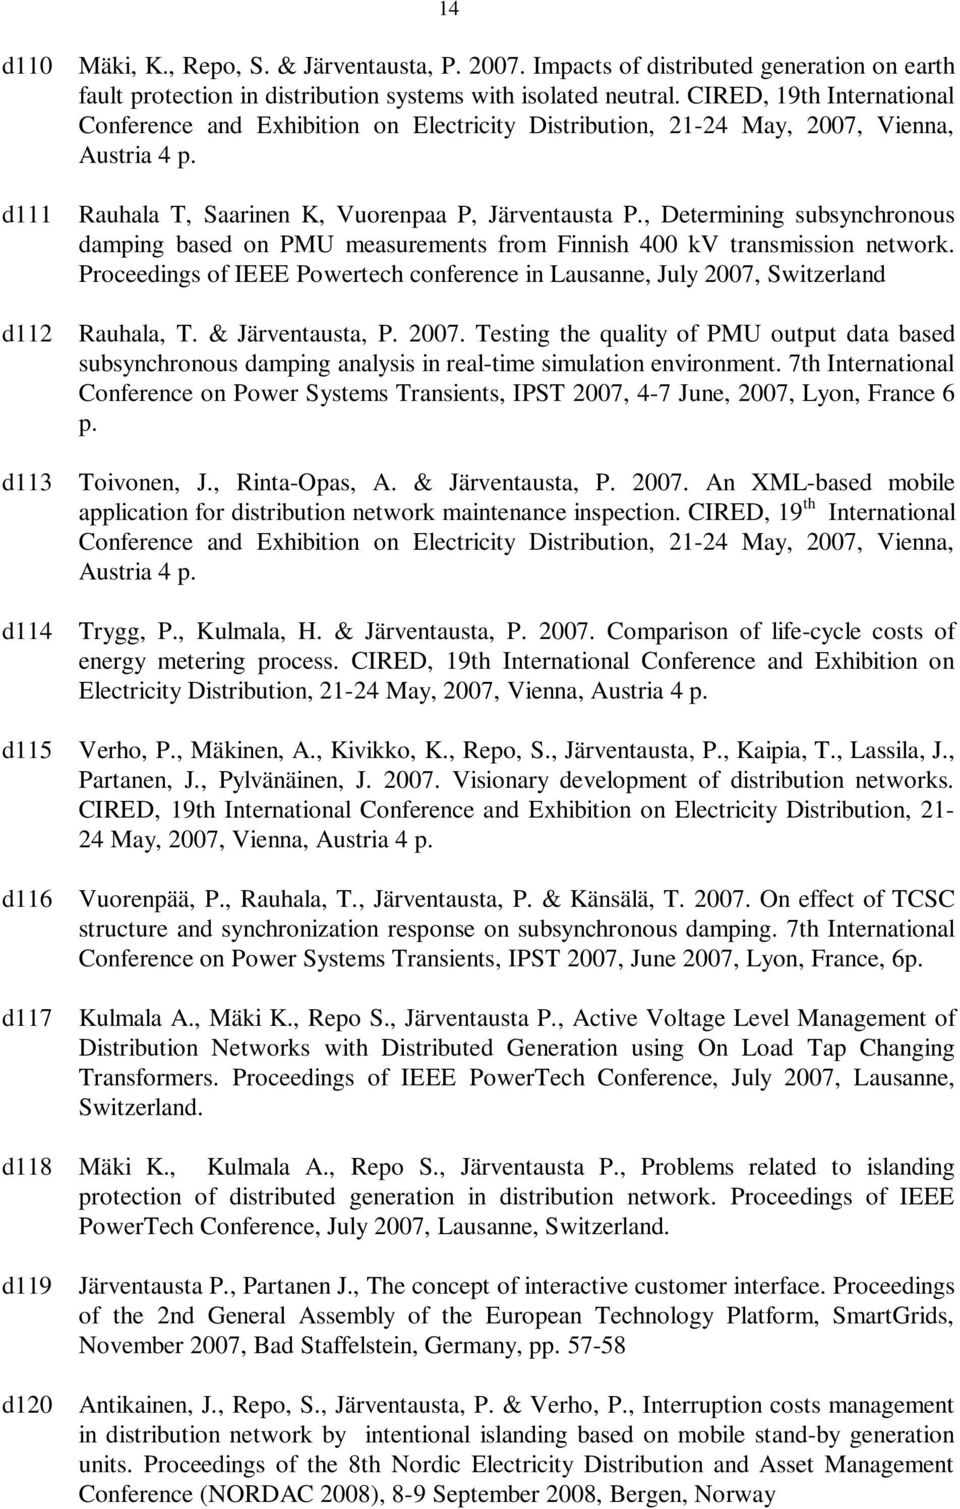 , Determining subsynchronous damping based on PMU measurements from Finnish 400 kv transmission network. Proceedings of IEEE Powertech conference in Lausanne, July 2007, Switzerland d112 Rauhala, T.